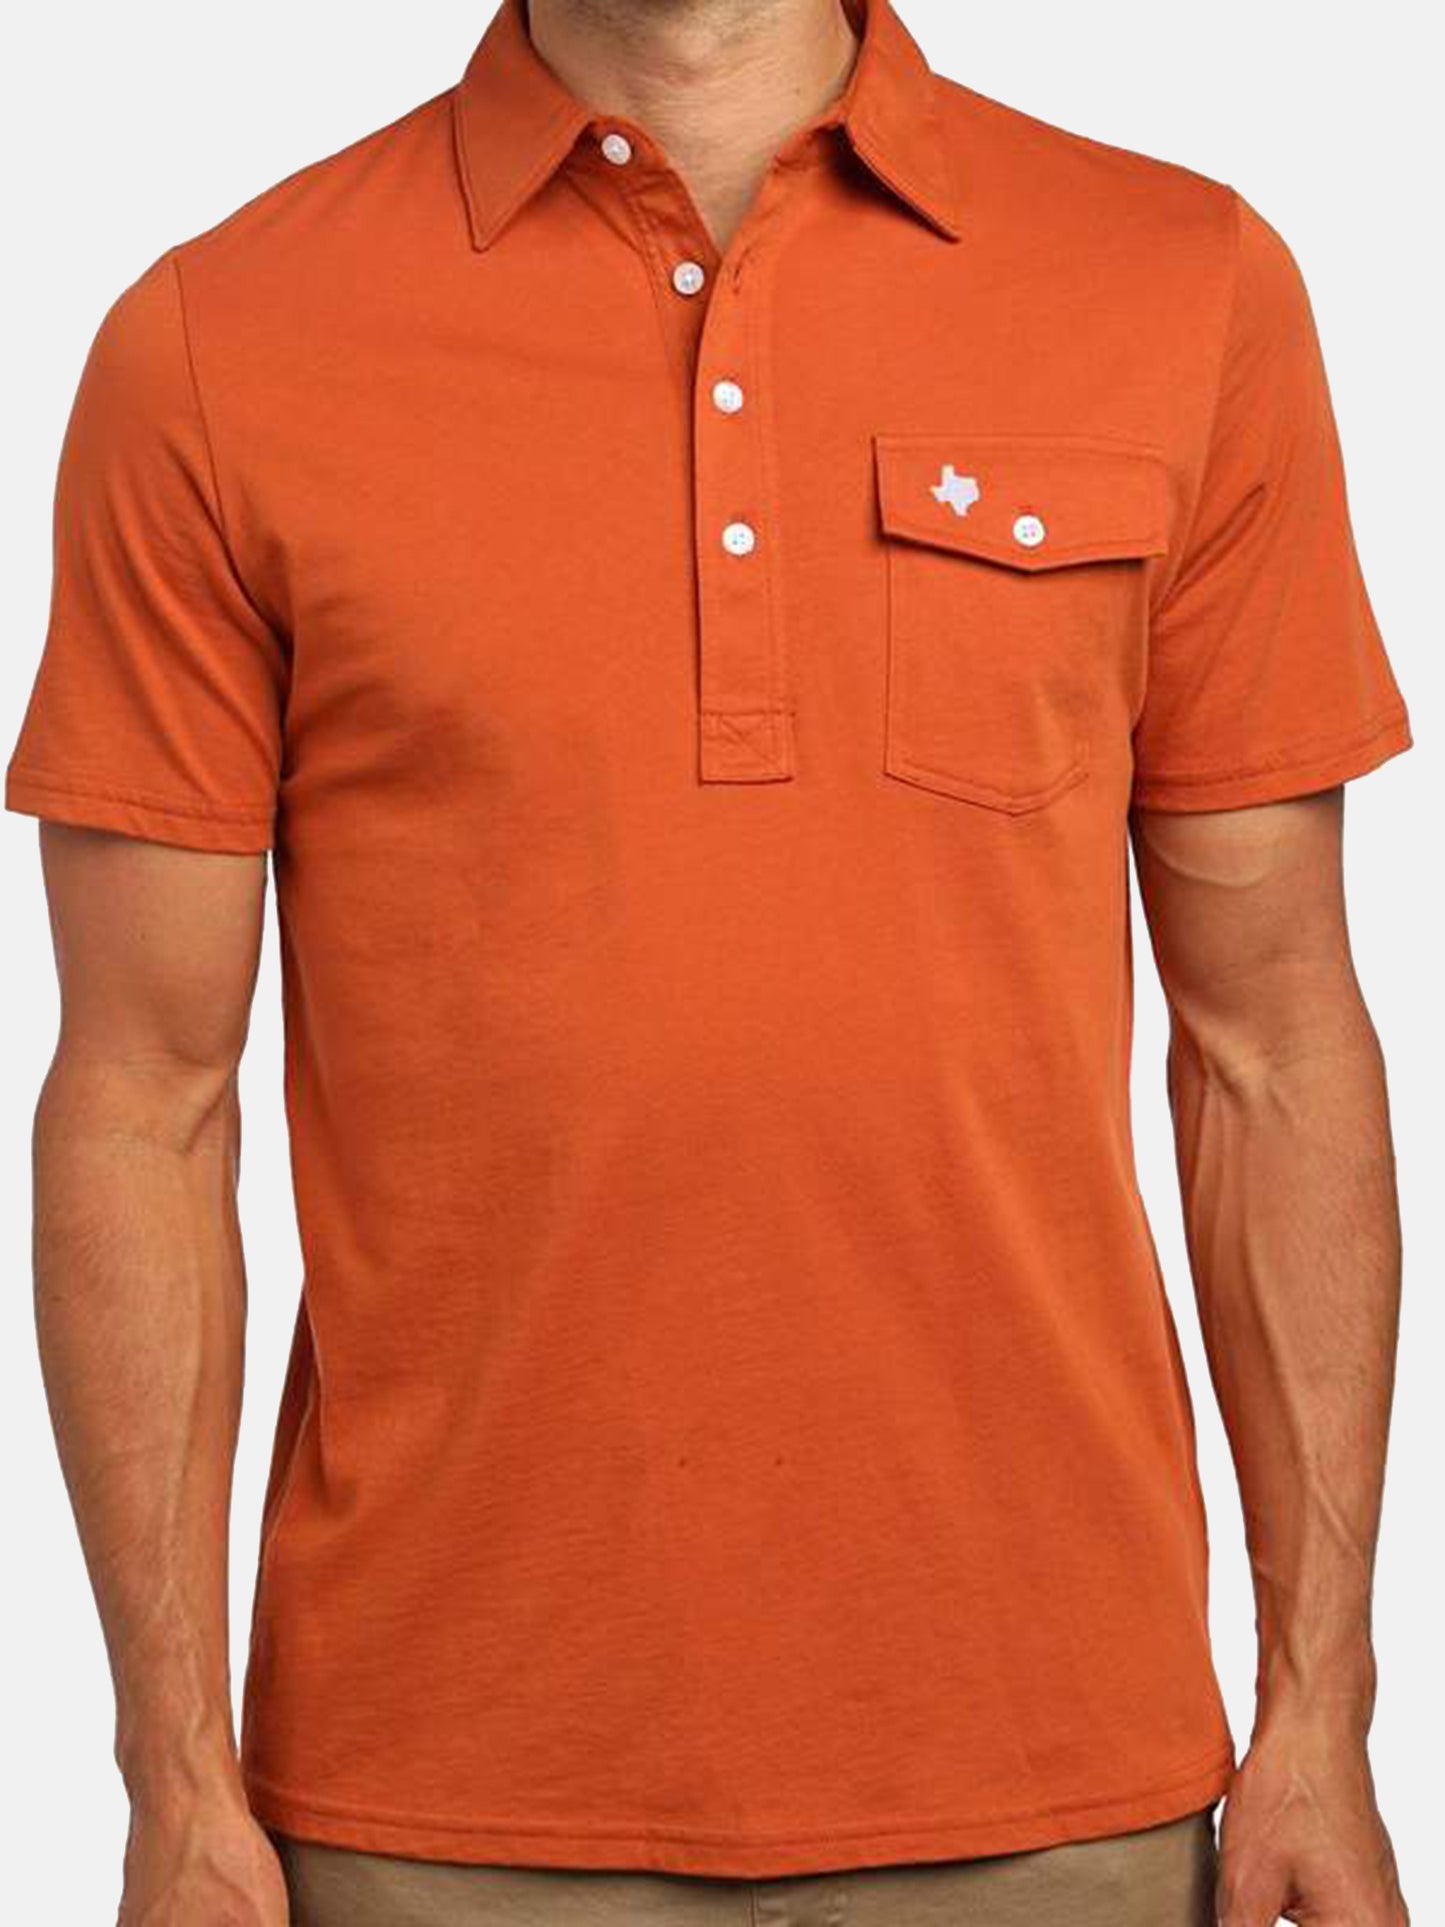 Criquet Men's Limited Edition Players Shirt - The Earl